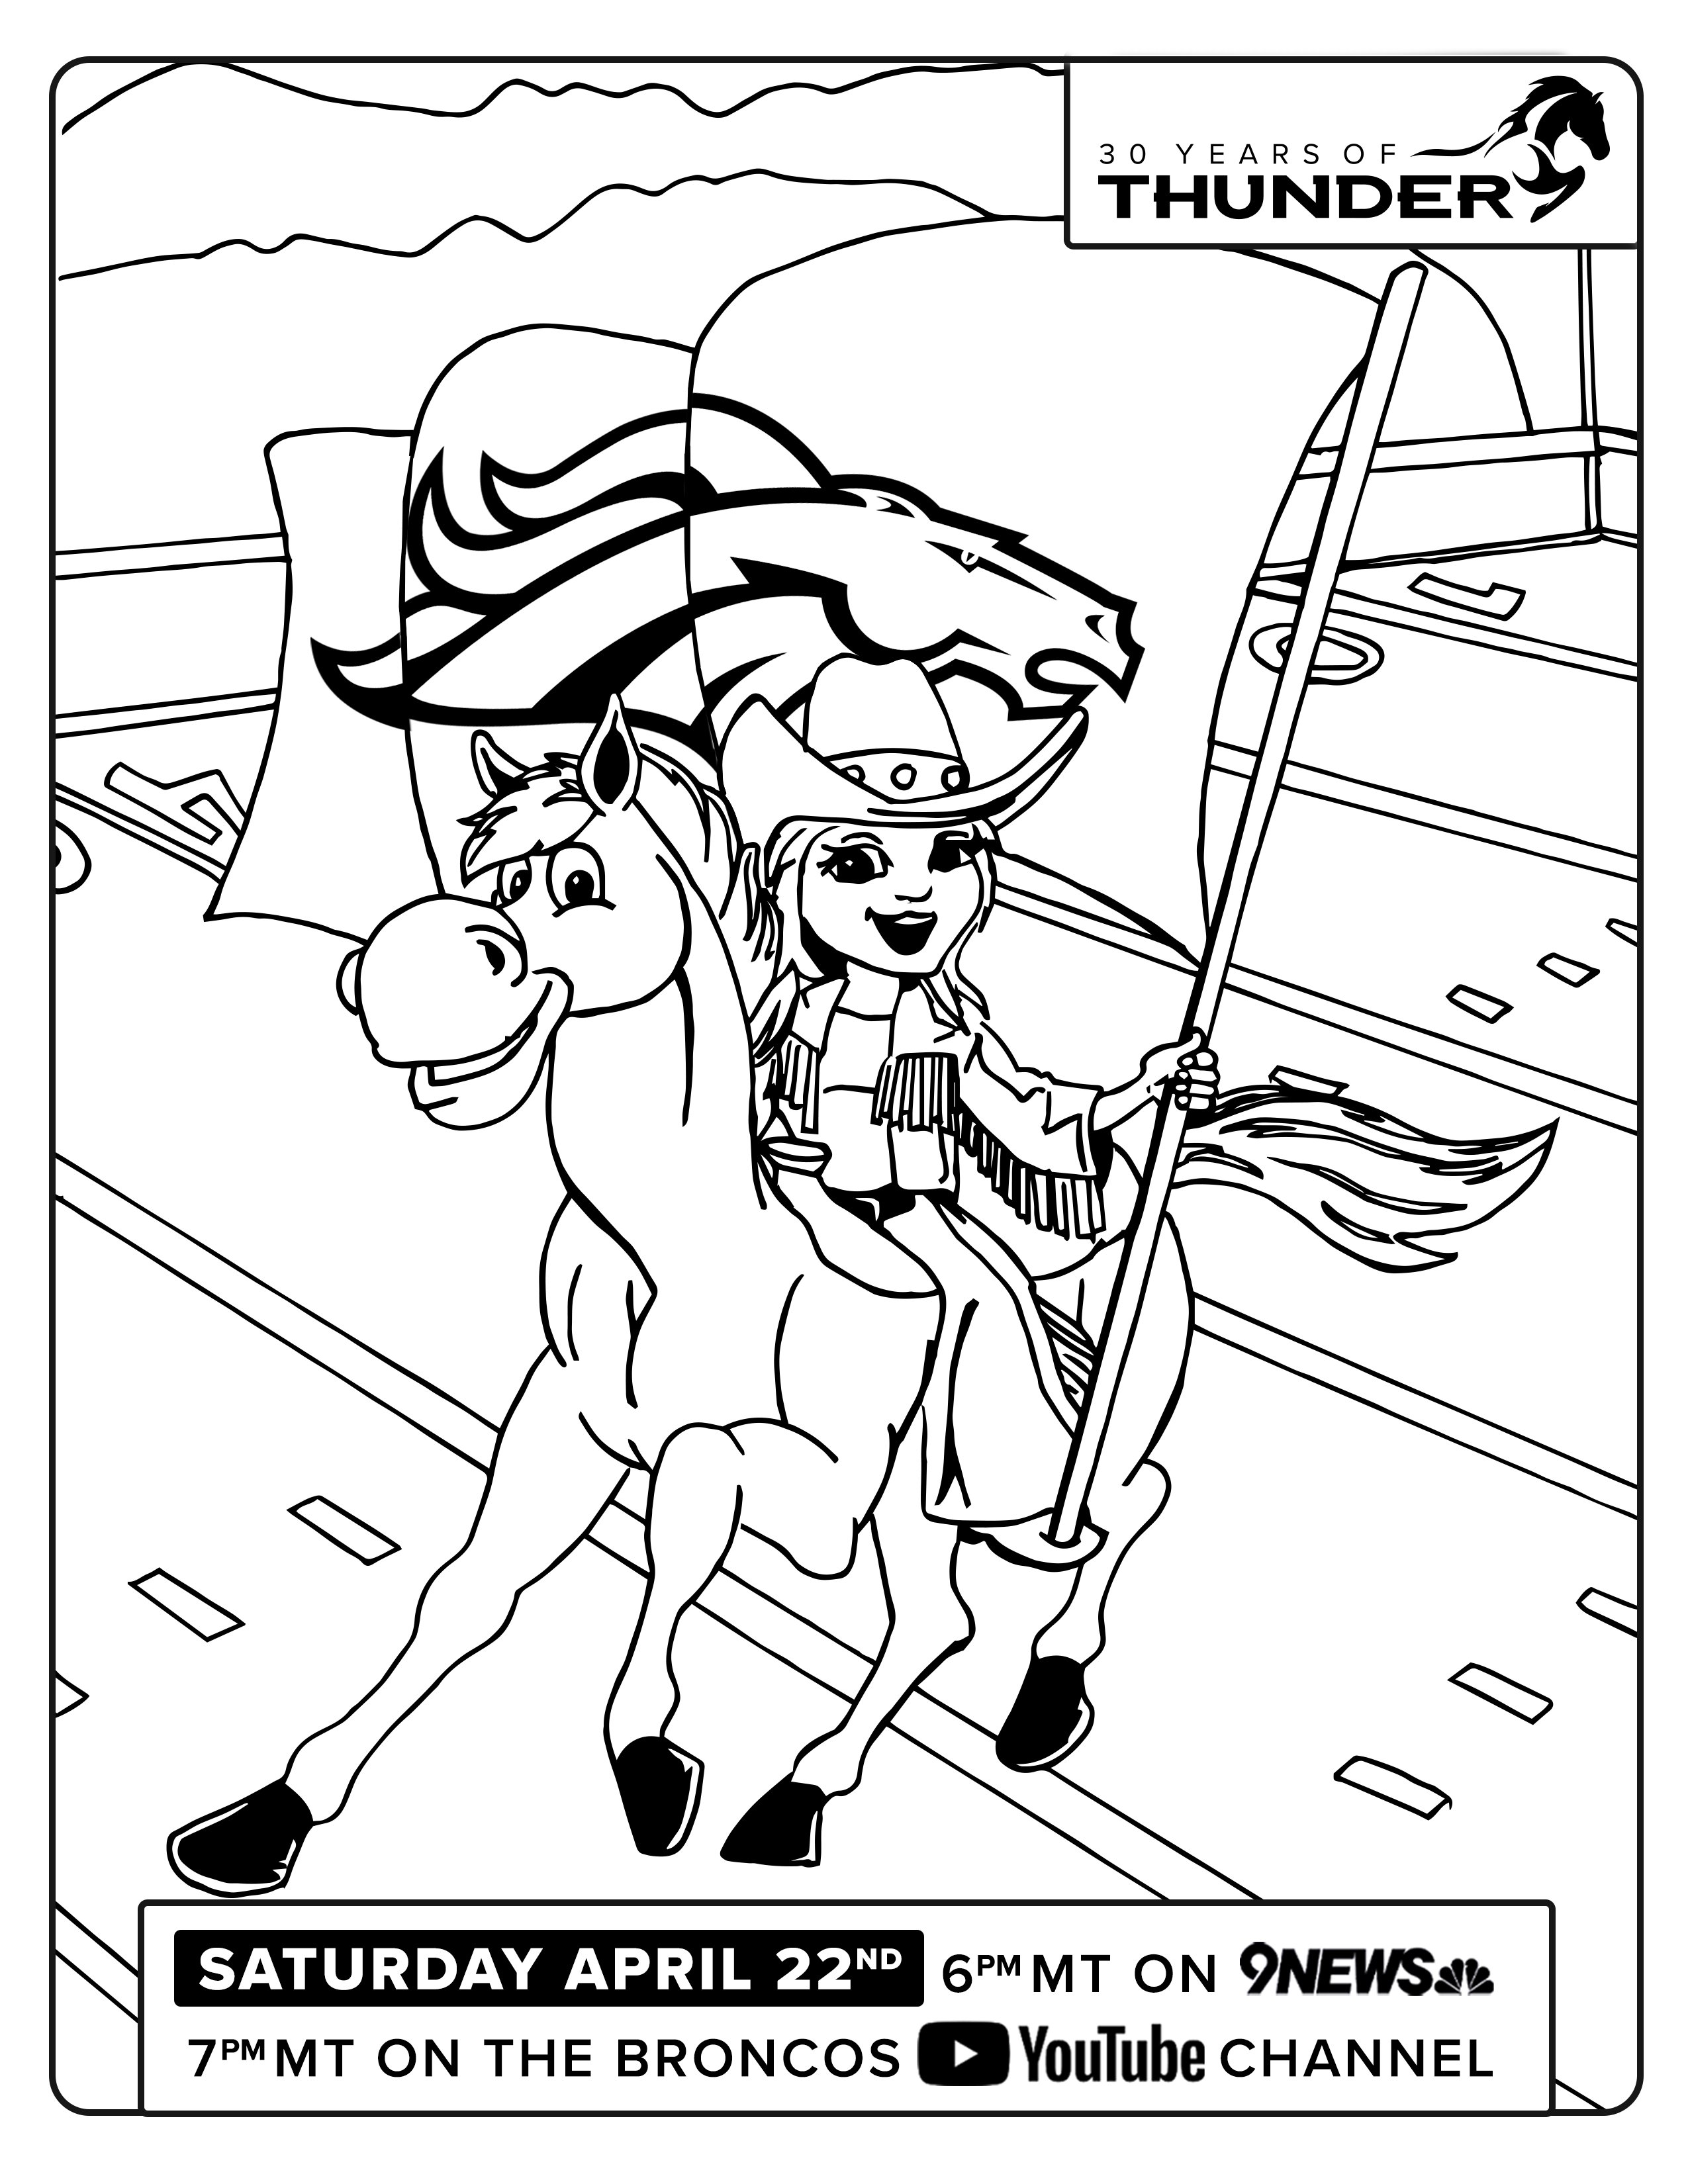 Broncos studio on x just âï days til years of thunder premieres get ready by filling out these printable coloring pages ð reply with your creations well rt our favorites